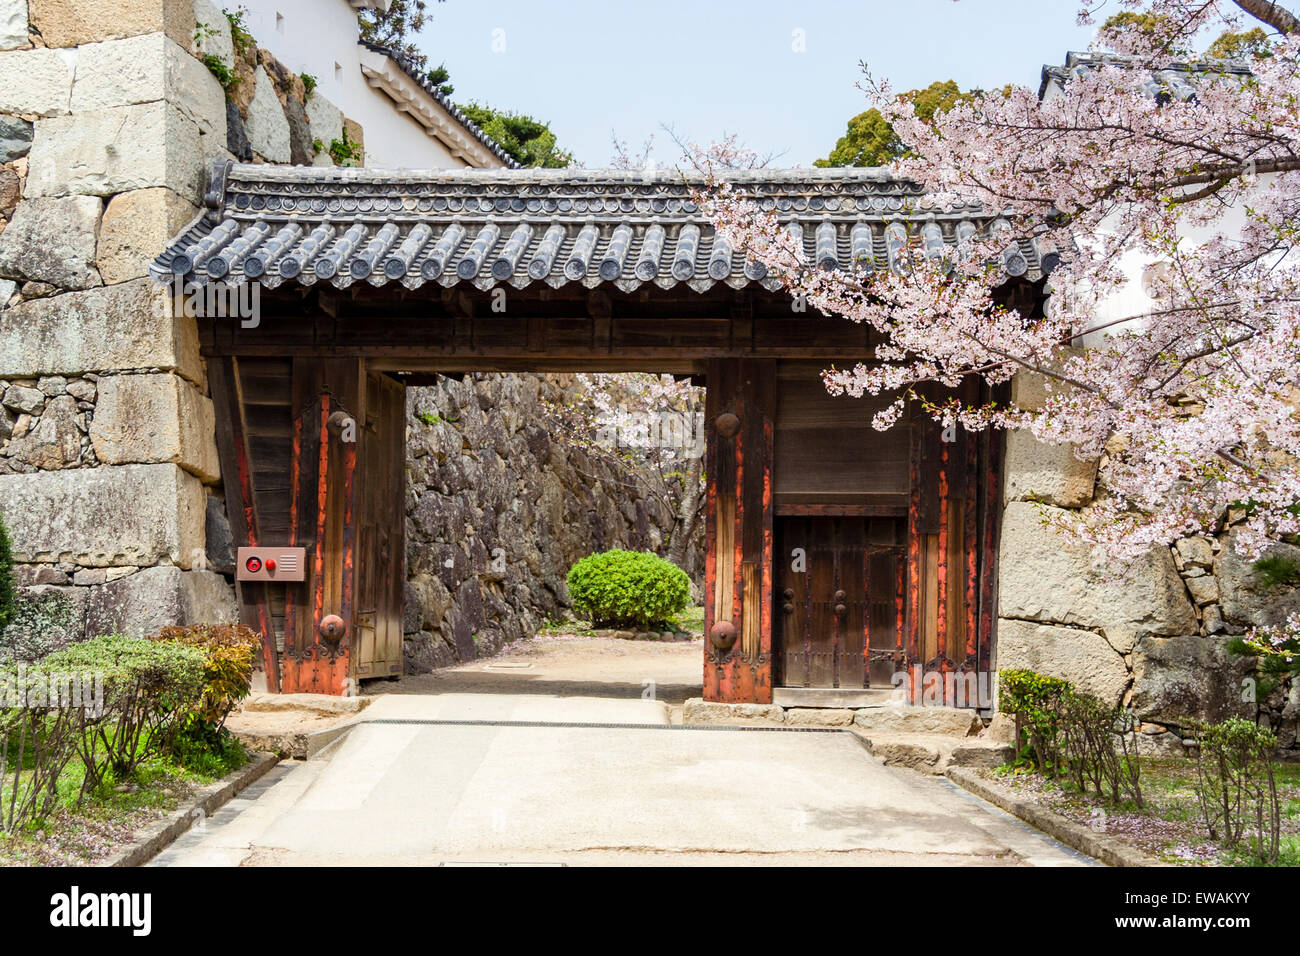 Himeji castle, Japan. The I-no-mon gate with cherry blossoms on one side. A Koraimon gate wedged between defense walls and the Sangoku bori moat. Stock Photo